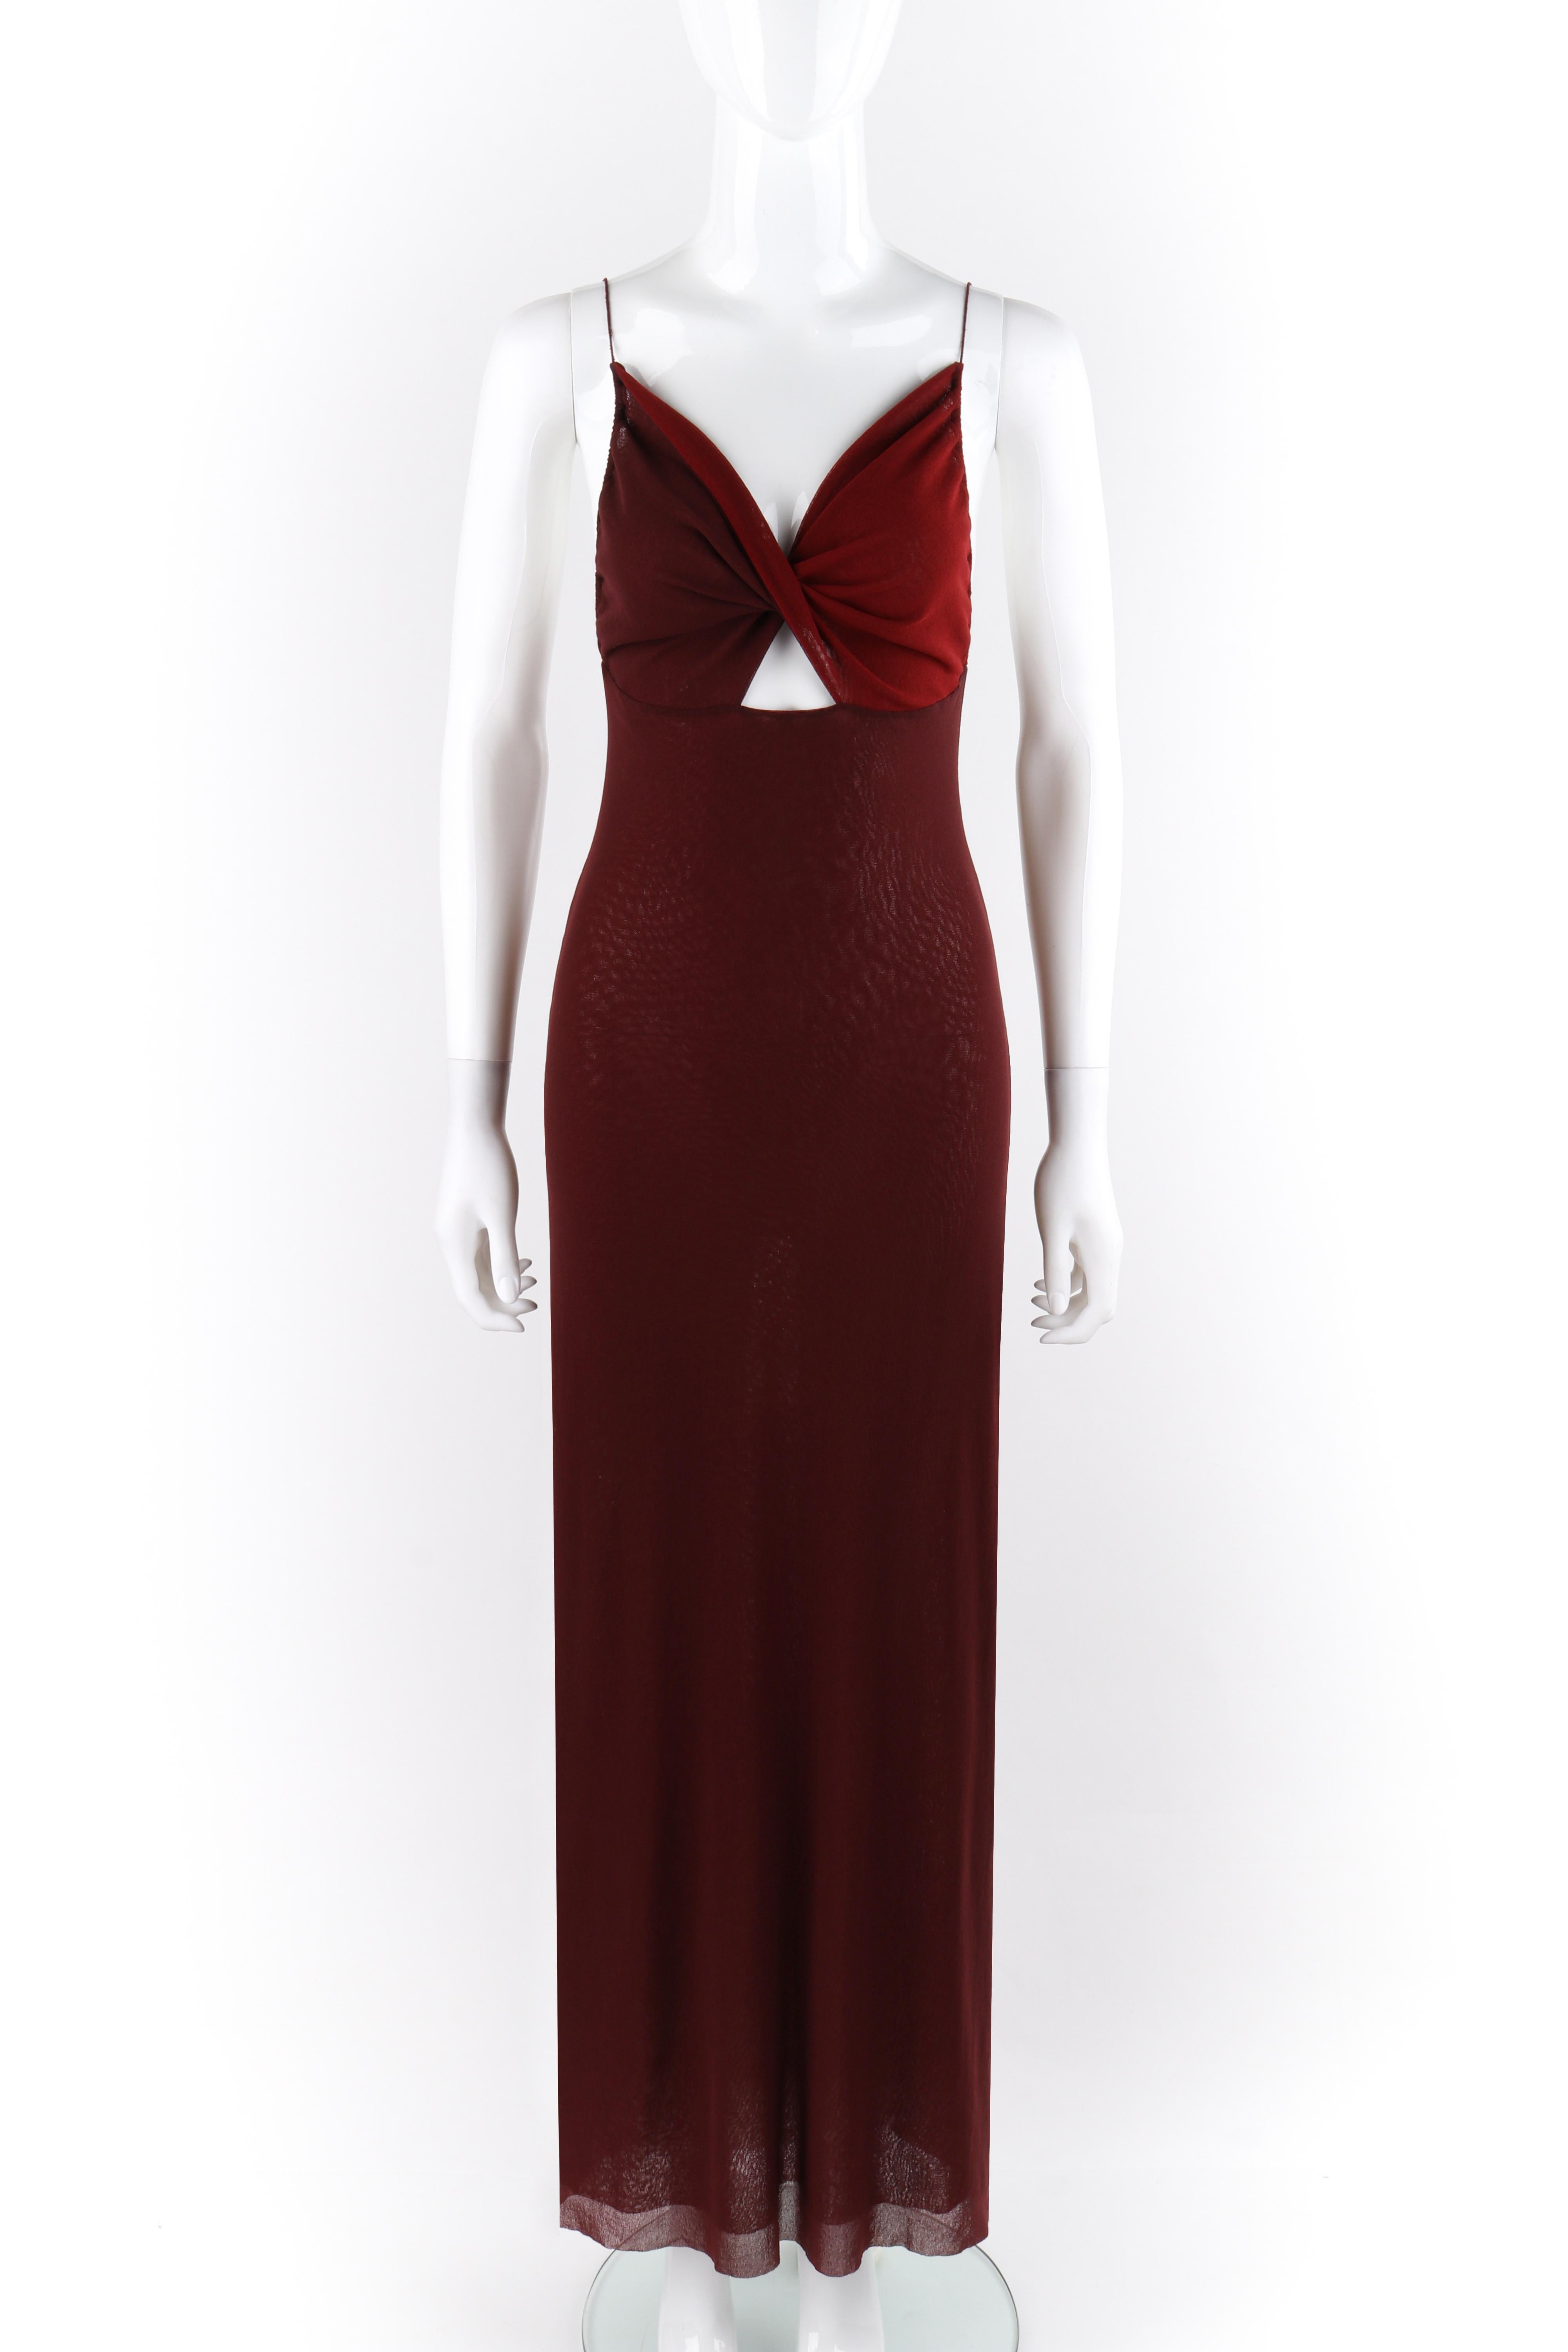 JEAN PAUL GAULTIER Burgundy Semi-Sheer Mesh Twist Cutout Tank Top Maxi Dress In Good Condition For Sale In Thiensville, WI